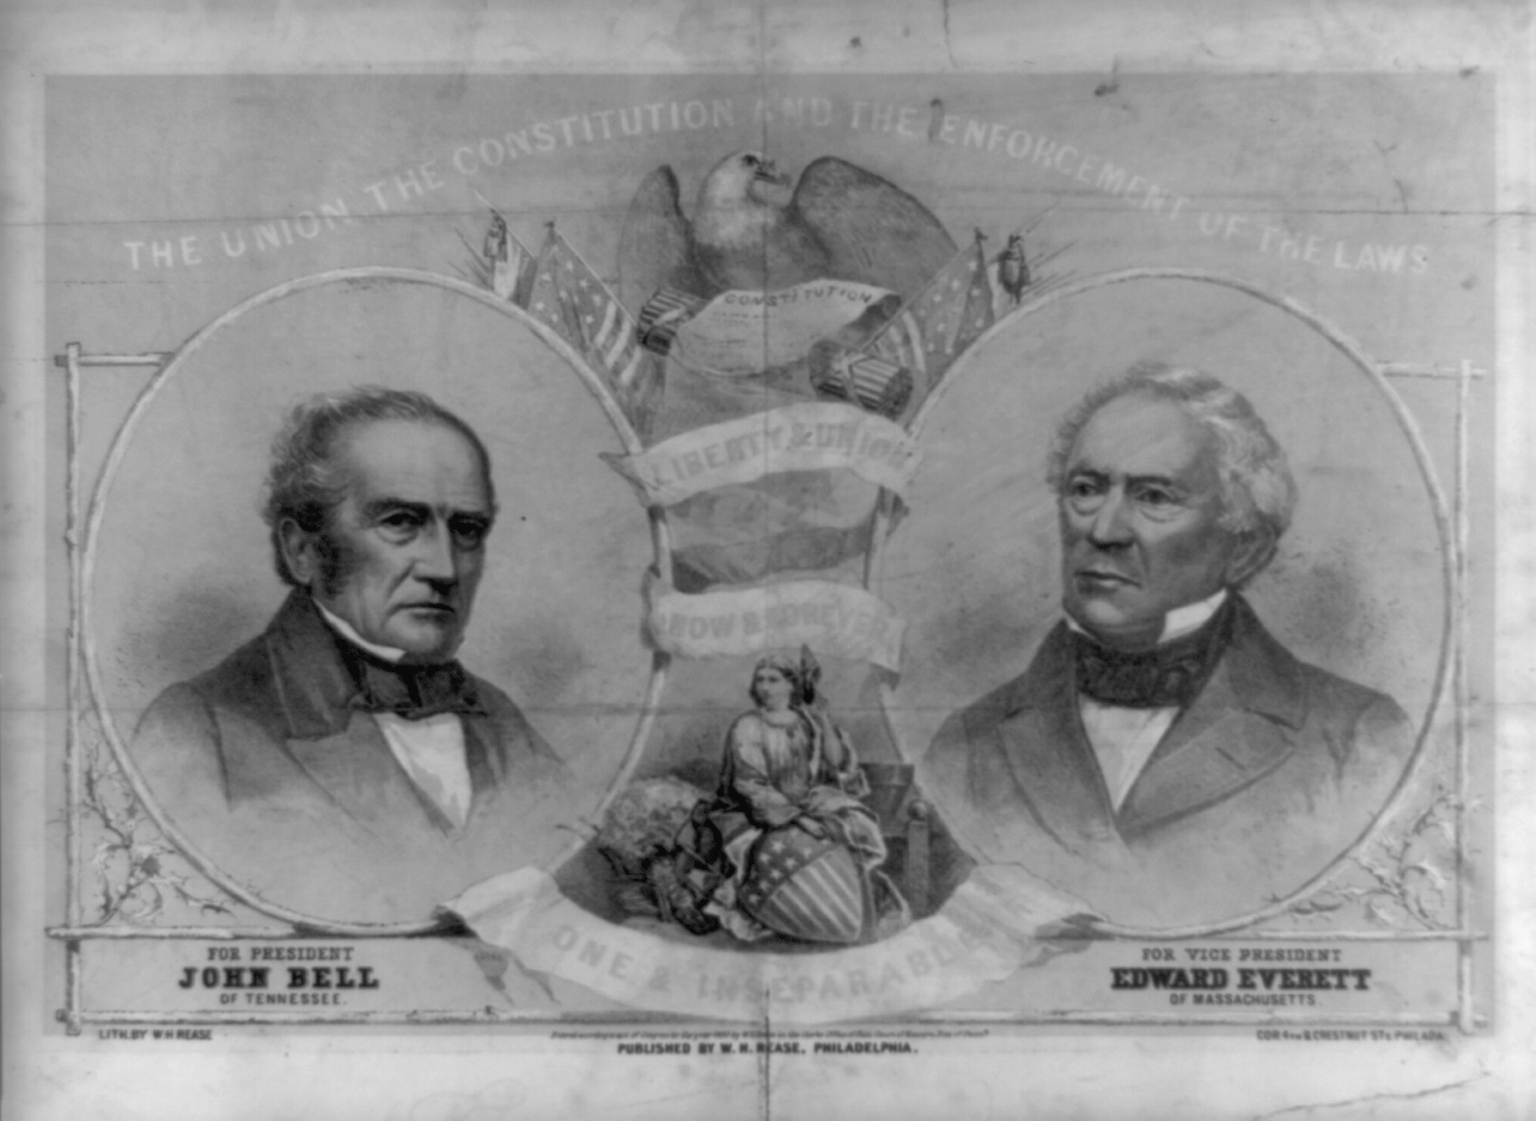 Constitutional Union campaign poster depicting Bell & Everret